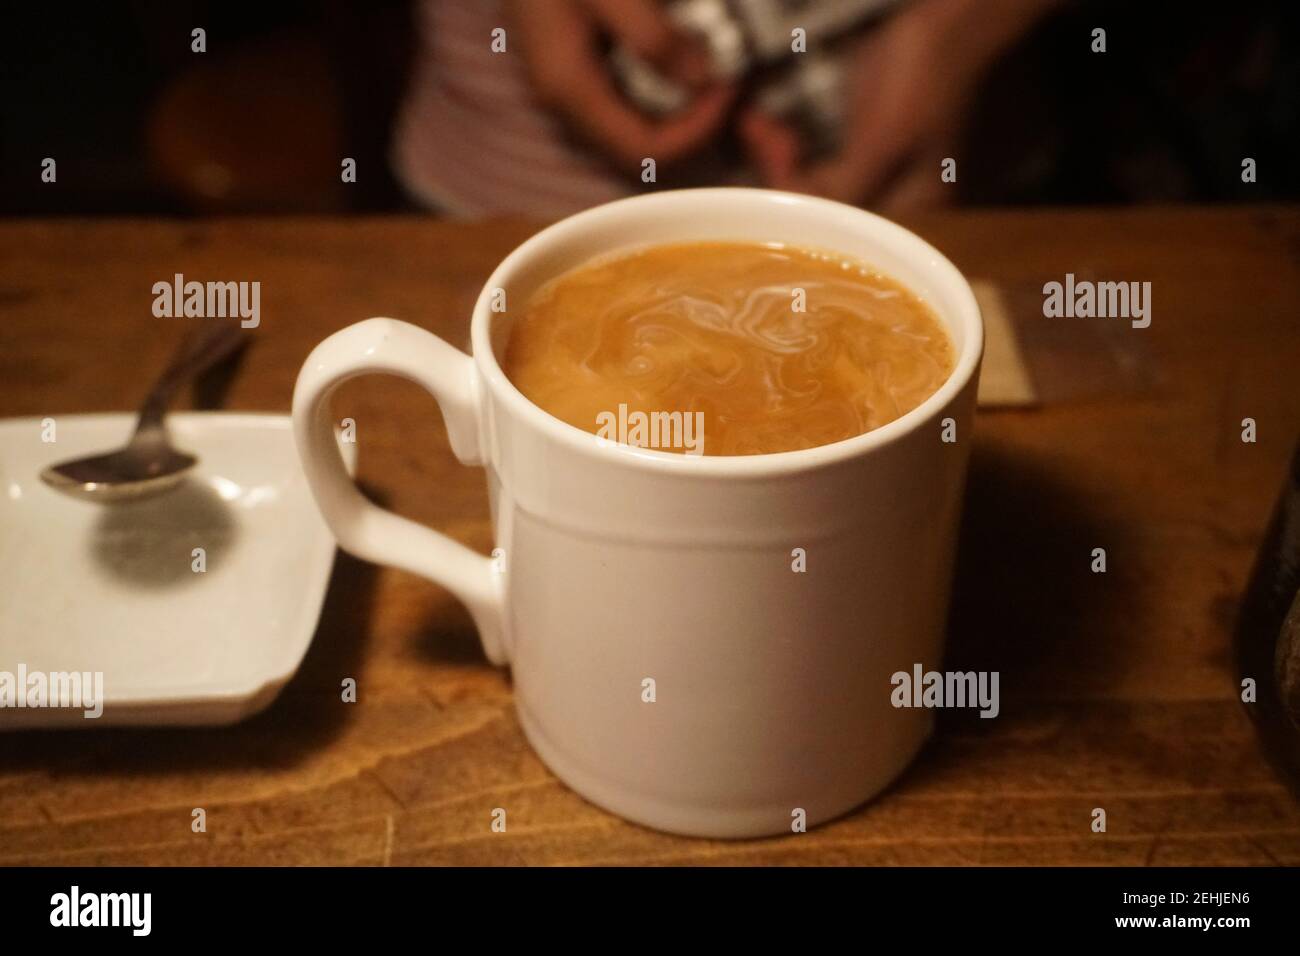 Coffee date I Cup of coffee in cafe Kyoto Japan Stock Photo Stock Images Stock Pictures Stock Photo